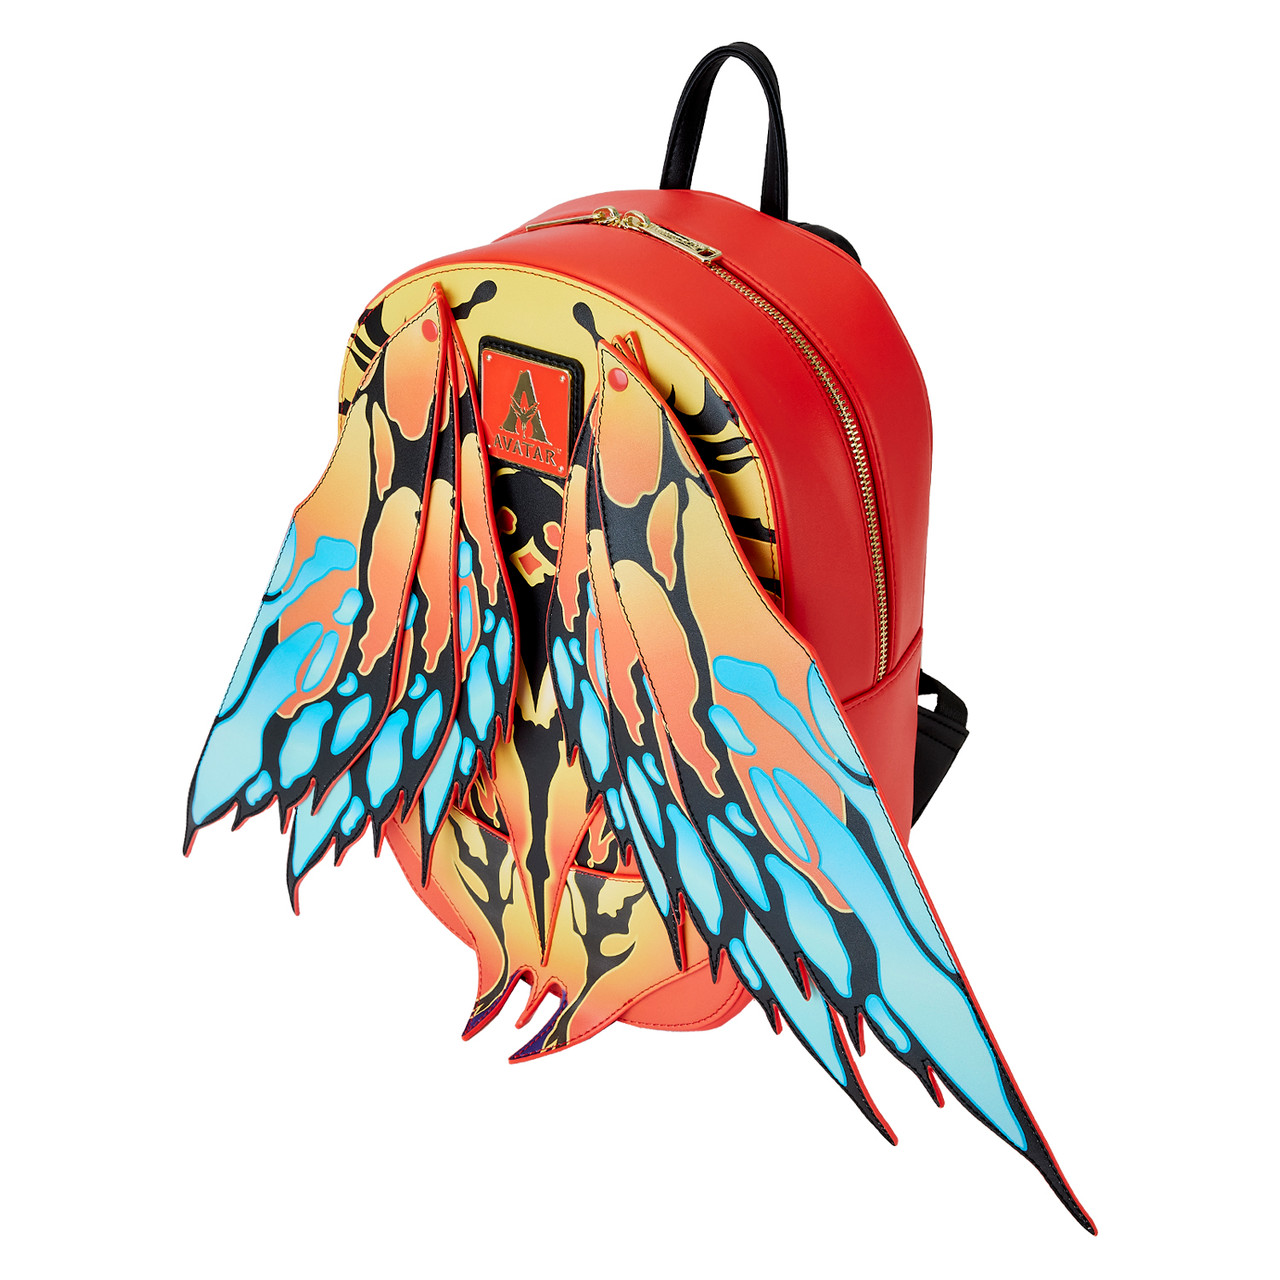 Buy Avatar: The Last Airbender Fire Dance Mini Backpack at Loungefly.